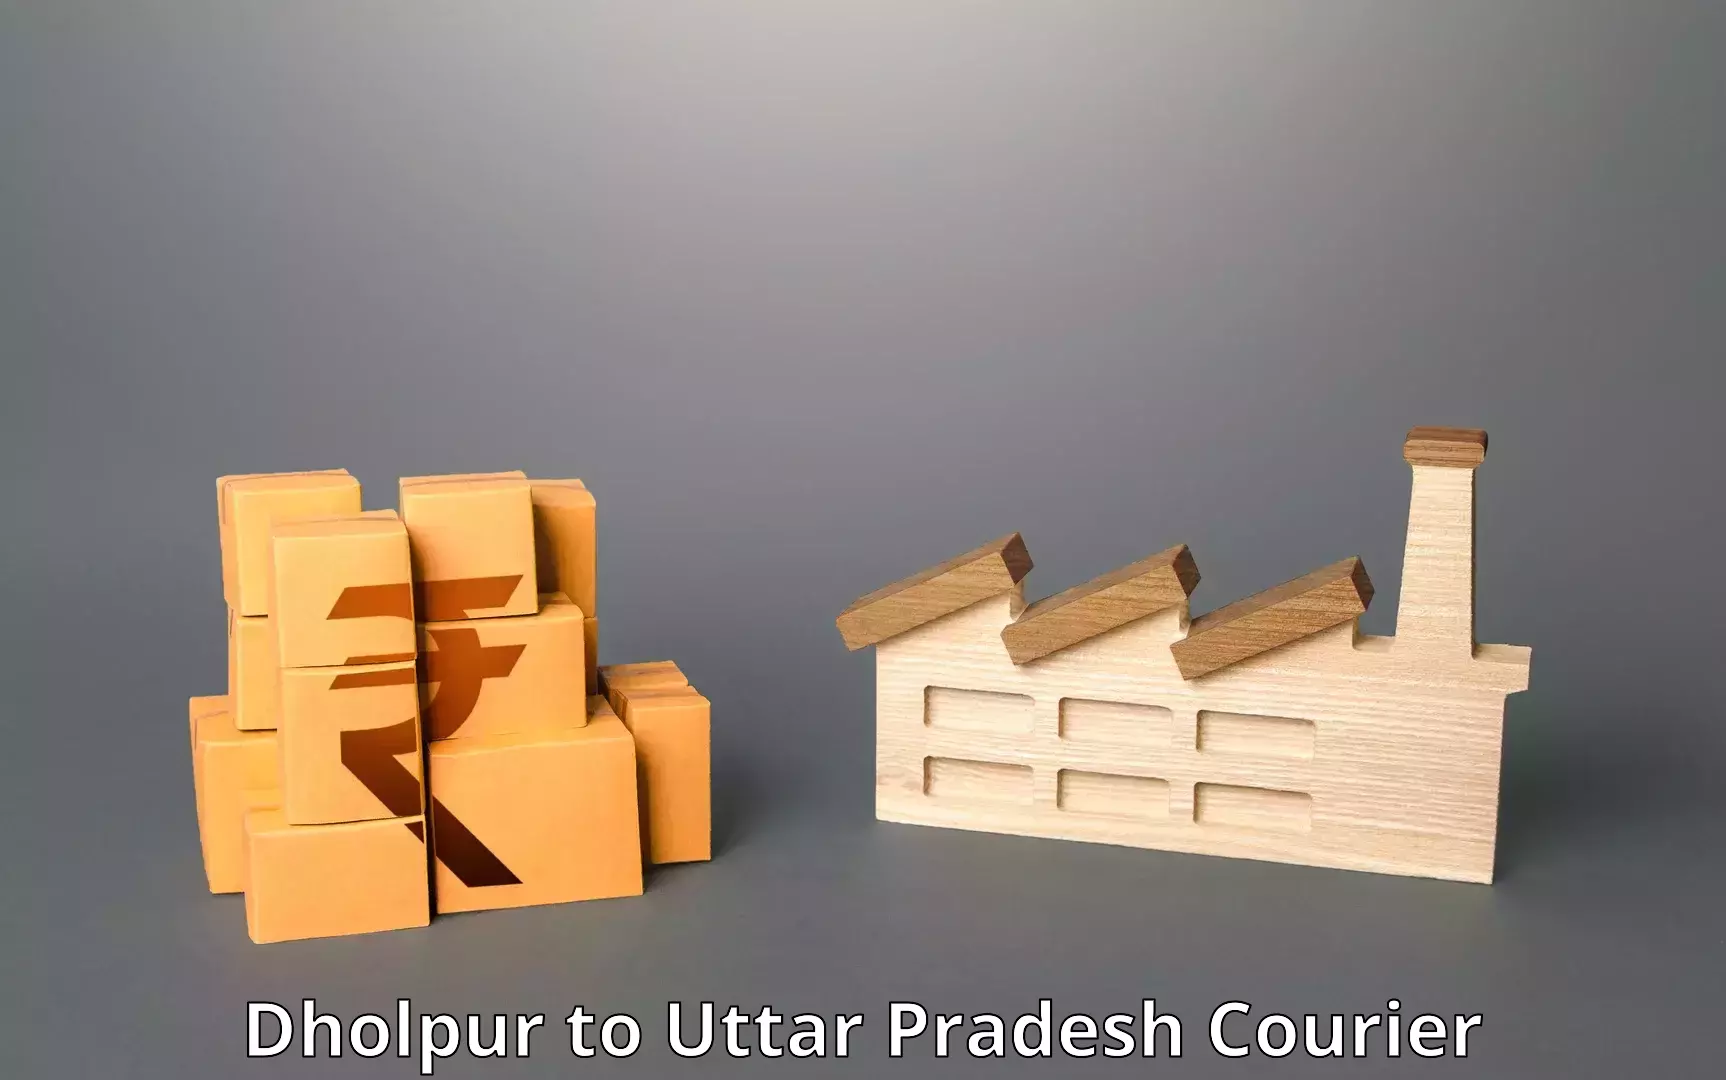 Automated parcel services Dholpur to Kirauli